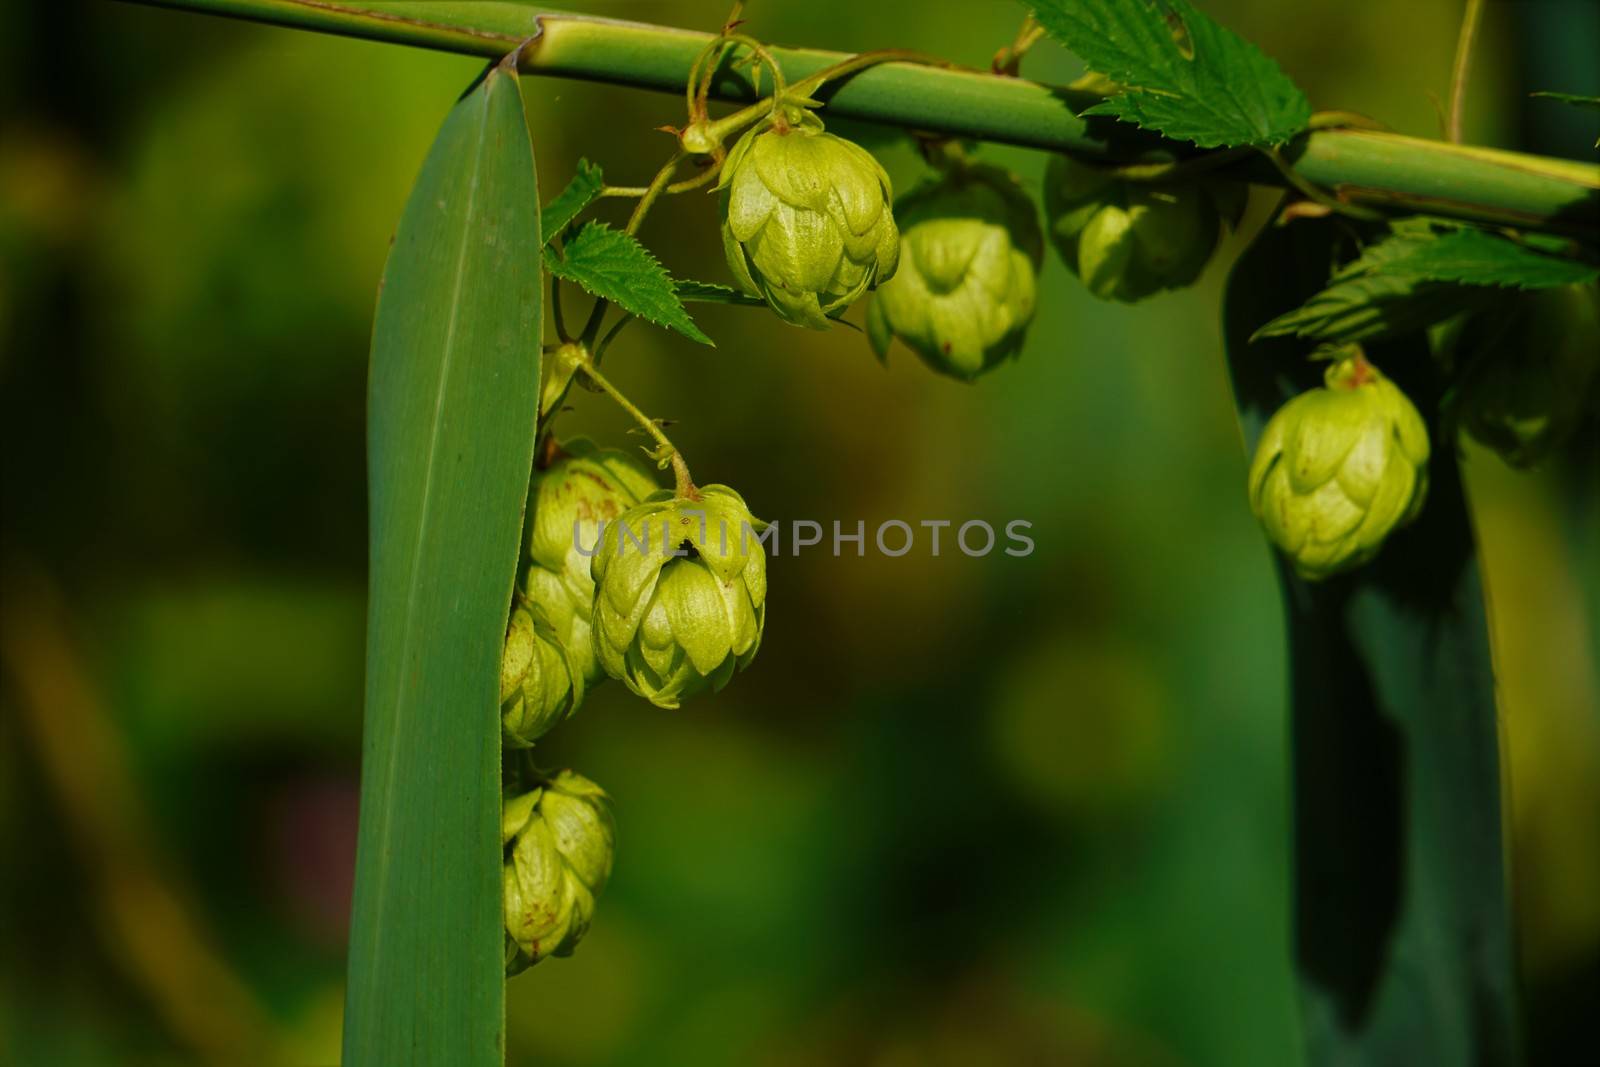 Female hop blossoms in the sun end of summer